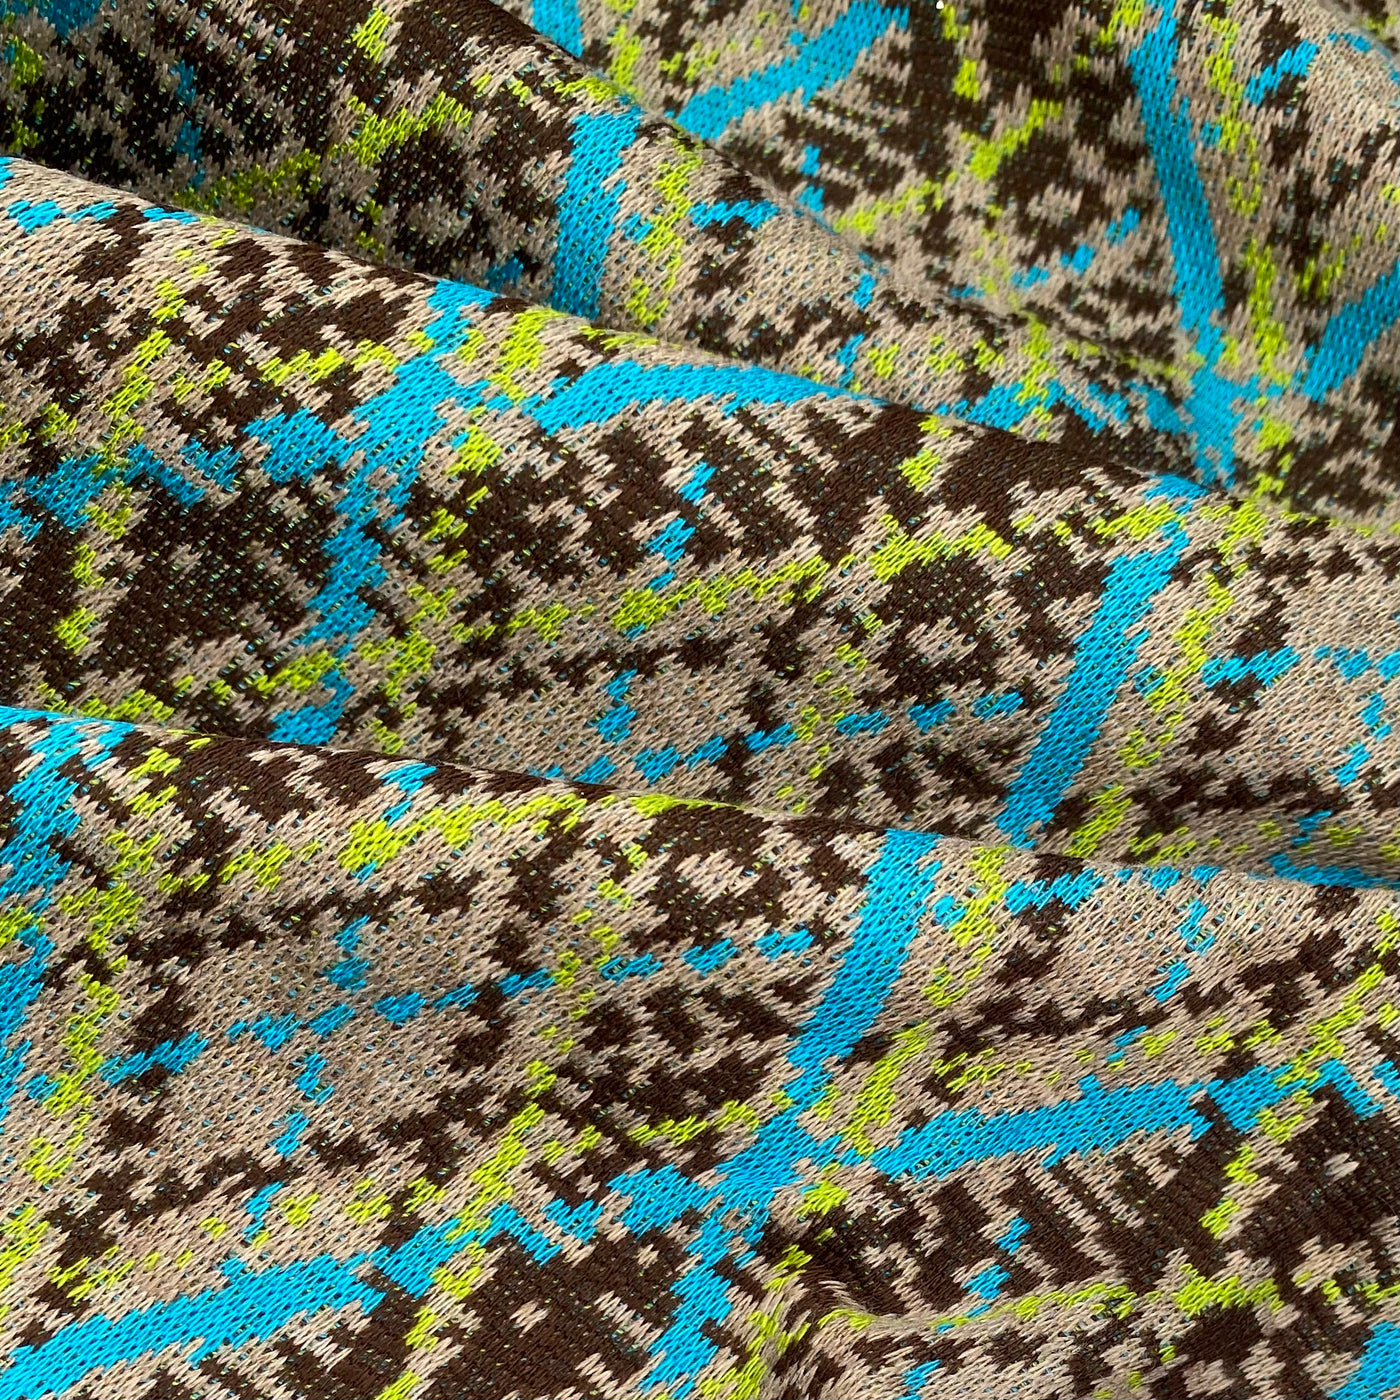 Patterned Polyester Knit - Argyle -  Green/Blue/Brown